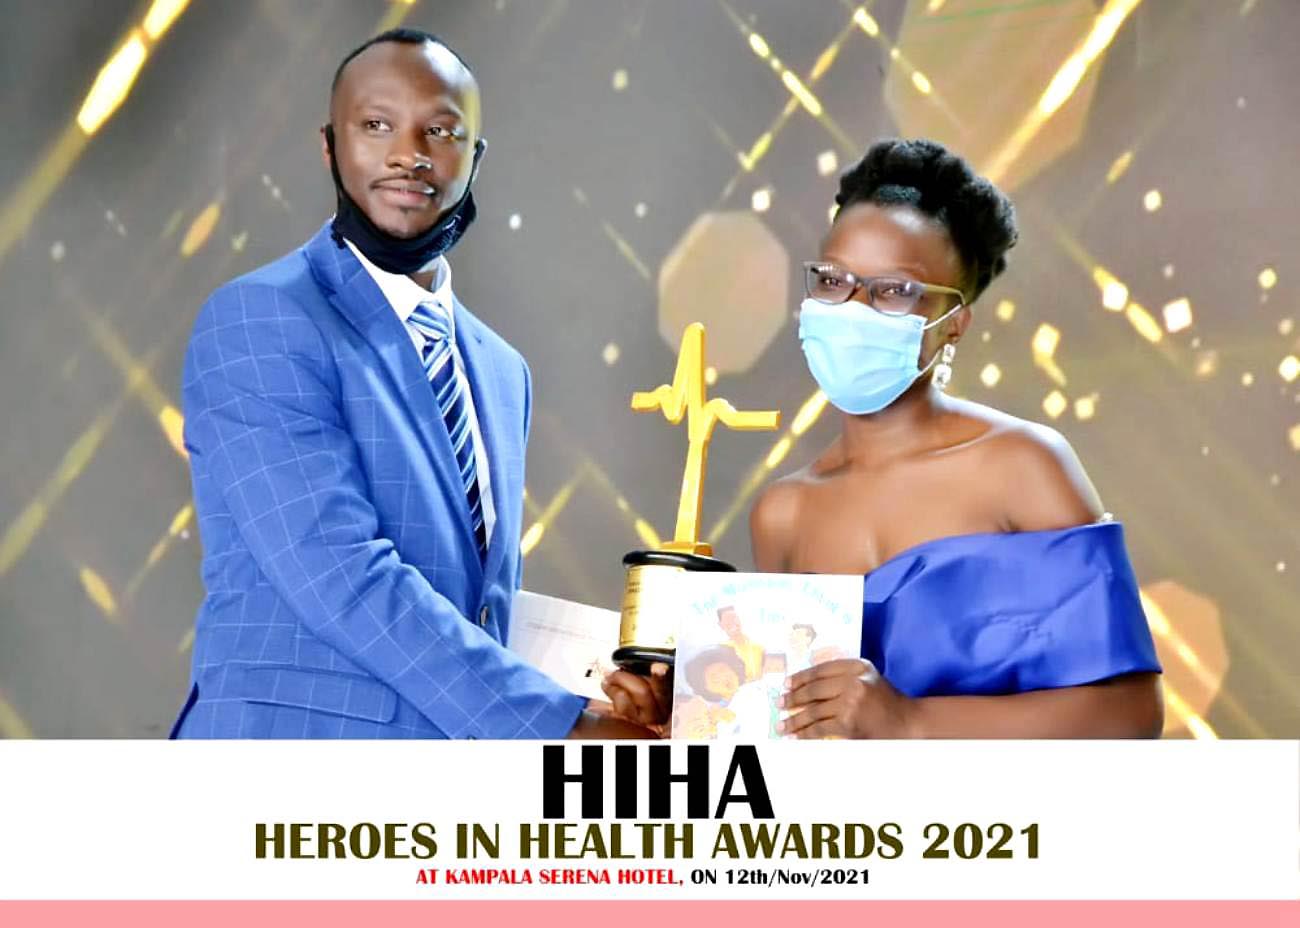 Ms. Anna Maria Gwokyalya (MBChB IV), CHS, Makerere University (R) receives the ‘Student Innovation of the Year’ trophy at the Heroes in Health Awards (HIHA) held 12th November 2021 at Kampala Serena Hotel. Courtesy Photo.